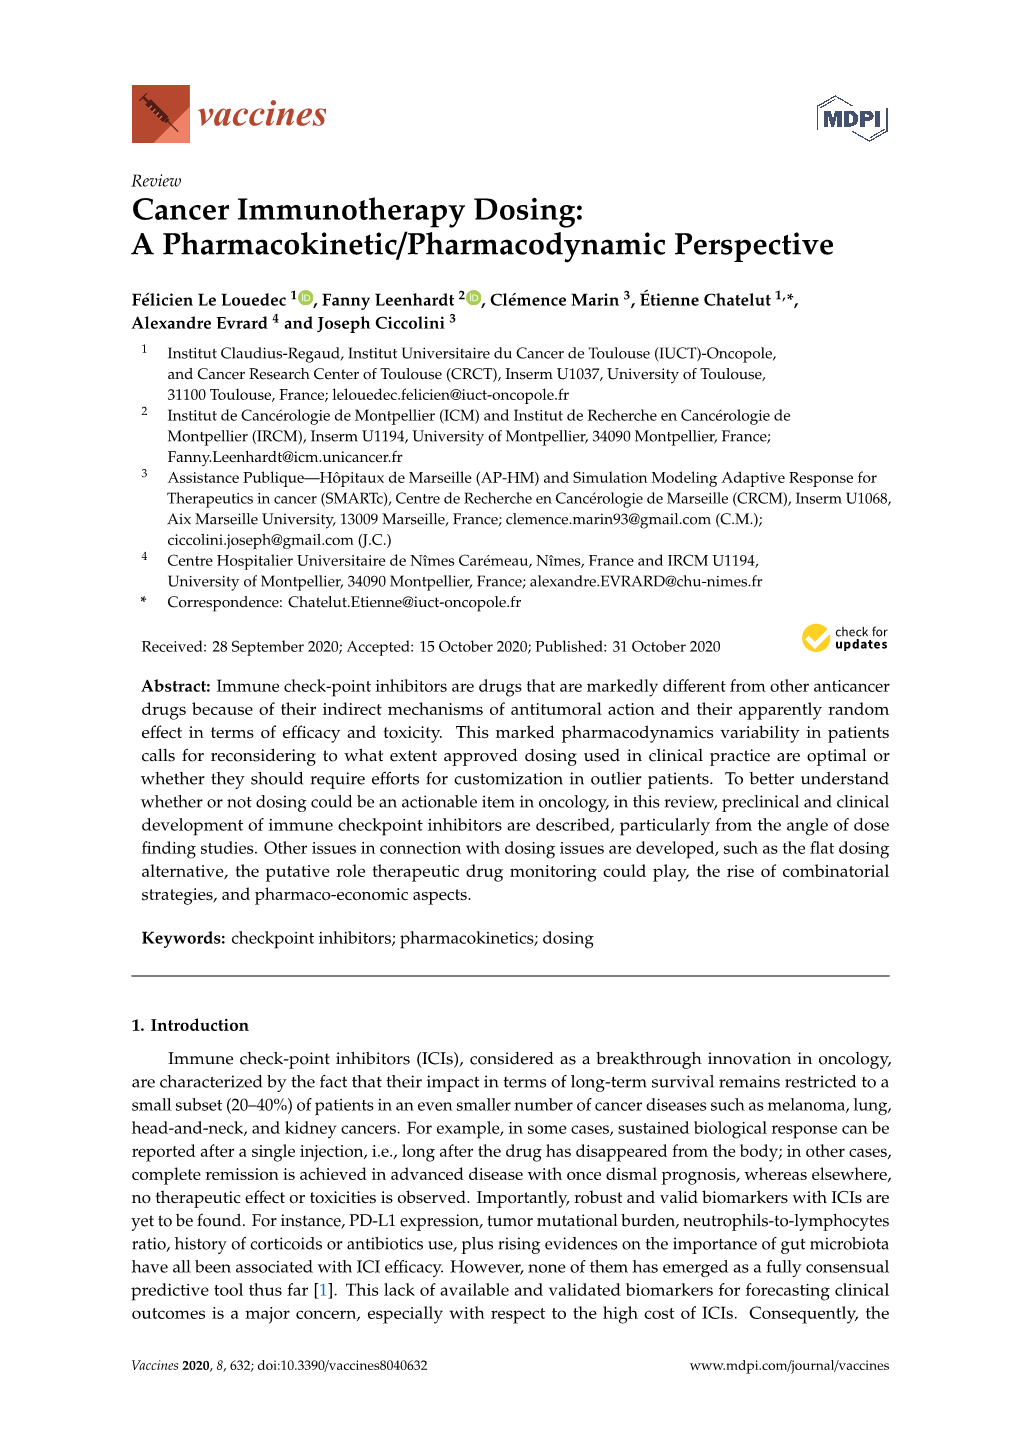 Cancer Immunotherapy Dosing: a Pharmacokinetic/Pharmacodynamic Perspective